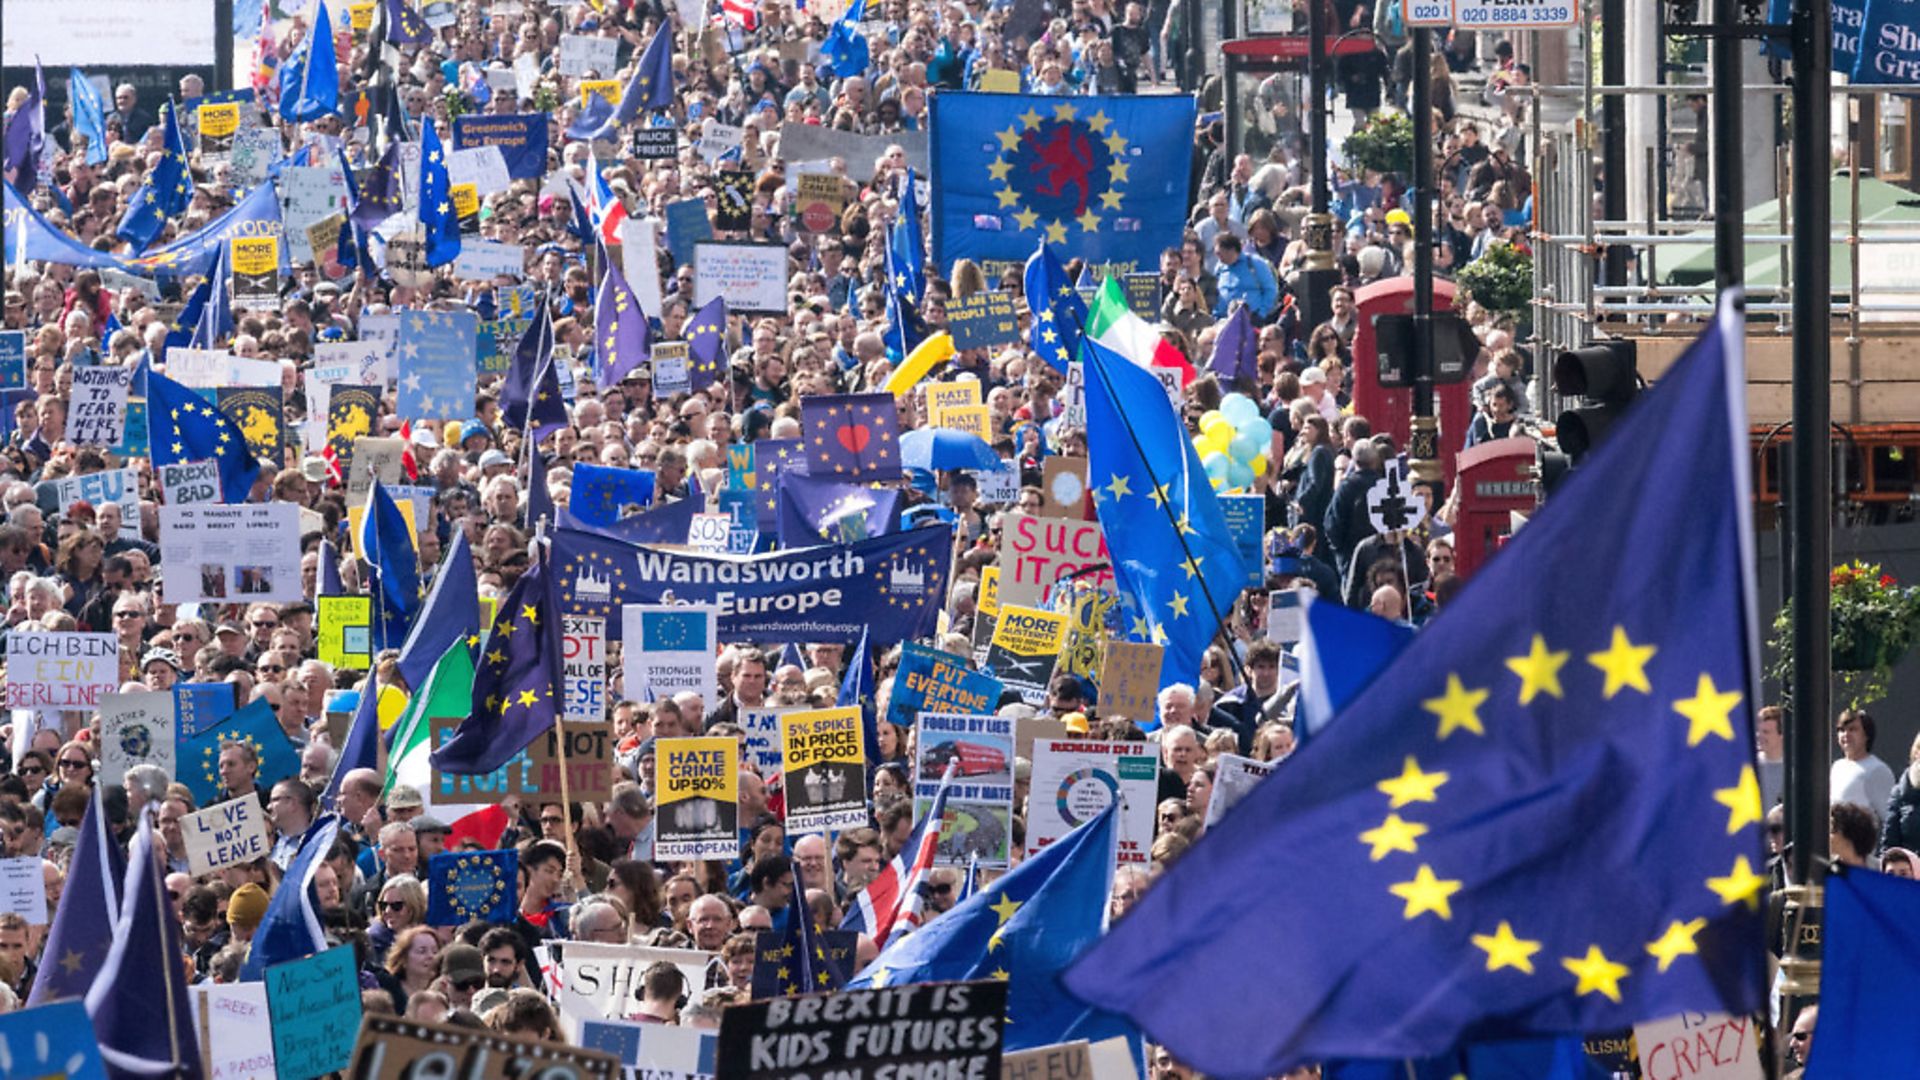 Anti-Brexit supporters take part in the Unite for Europe march (Photo by Ray Tang/Anadolu Agency/Getty Images) - Credit: Getty Images